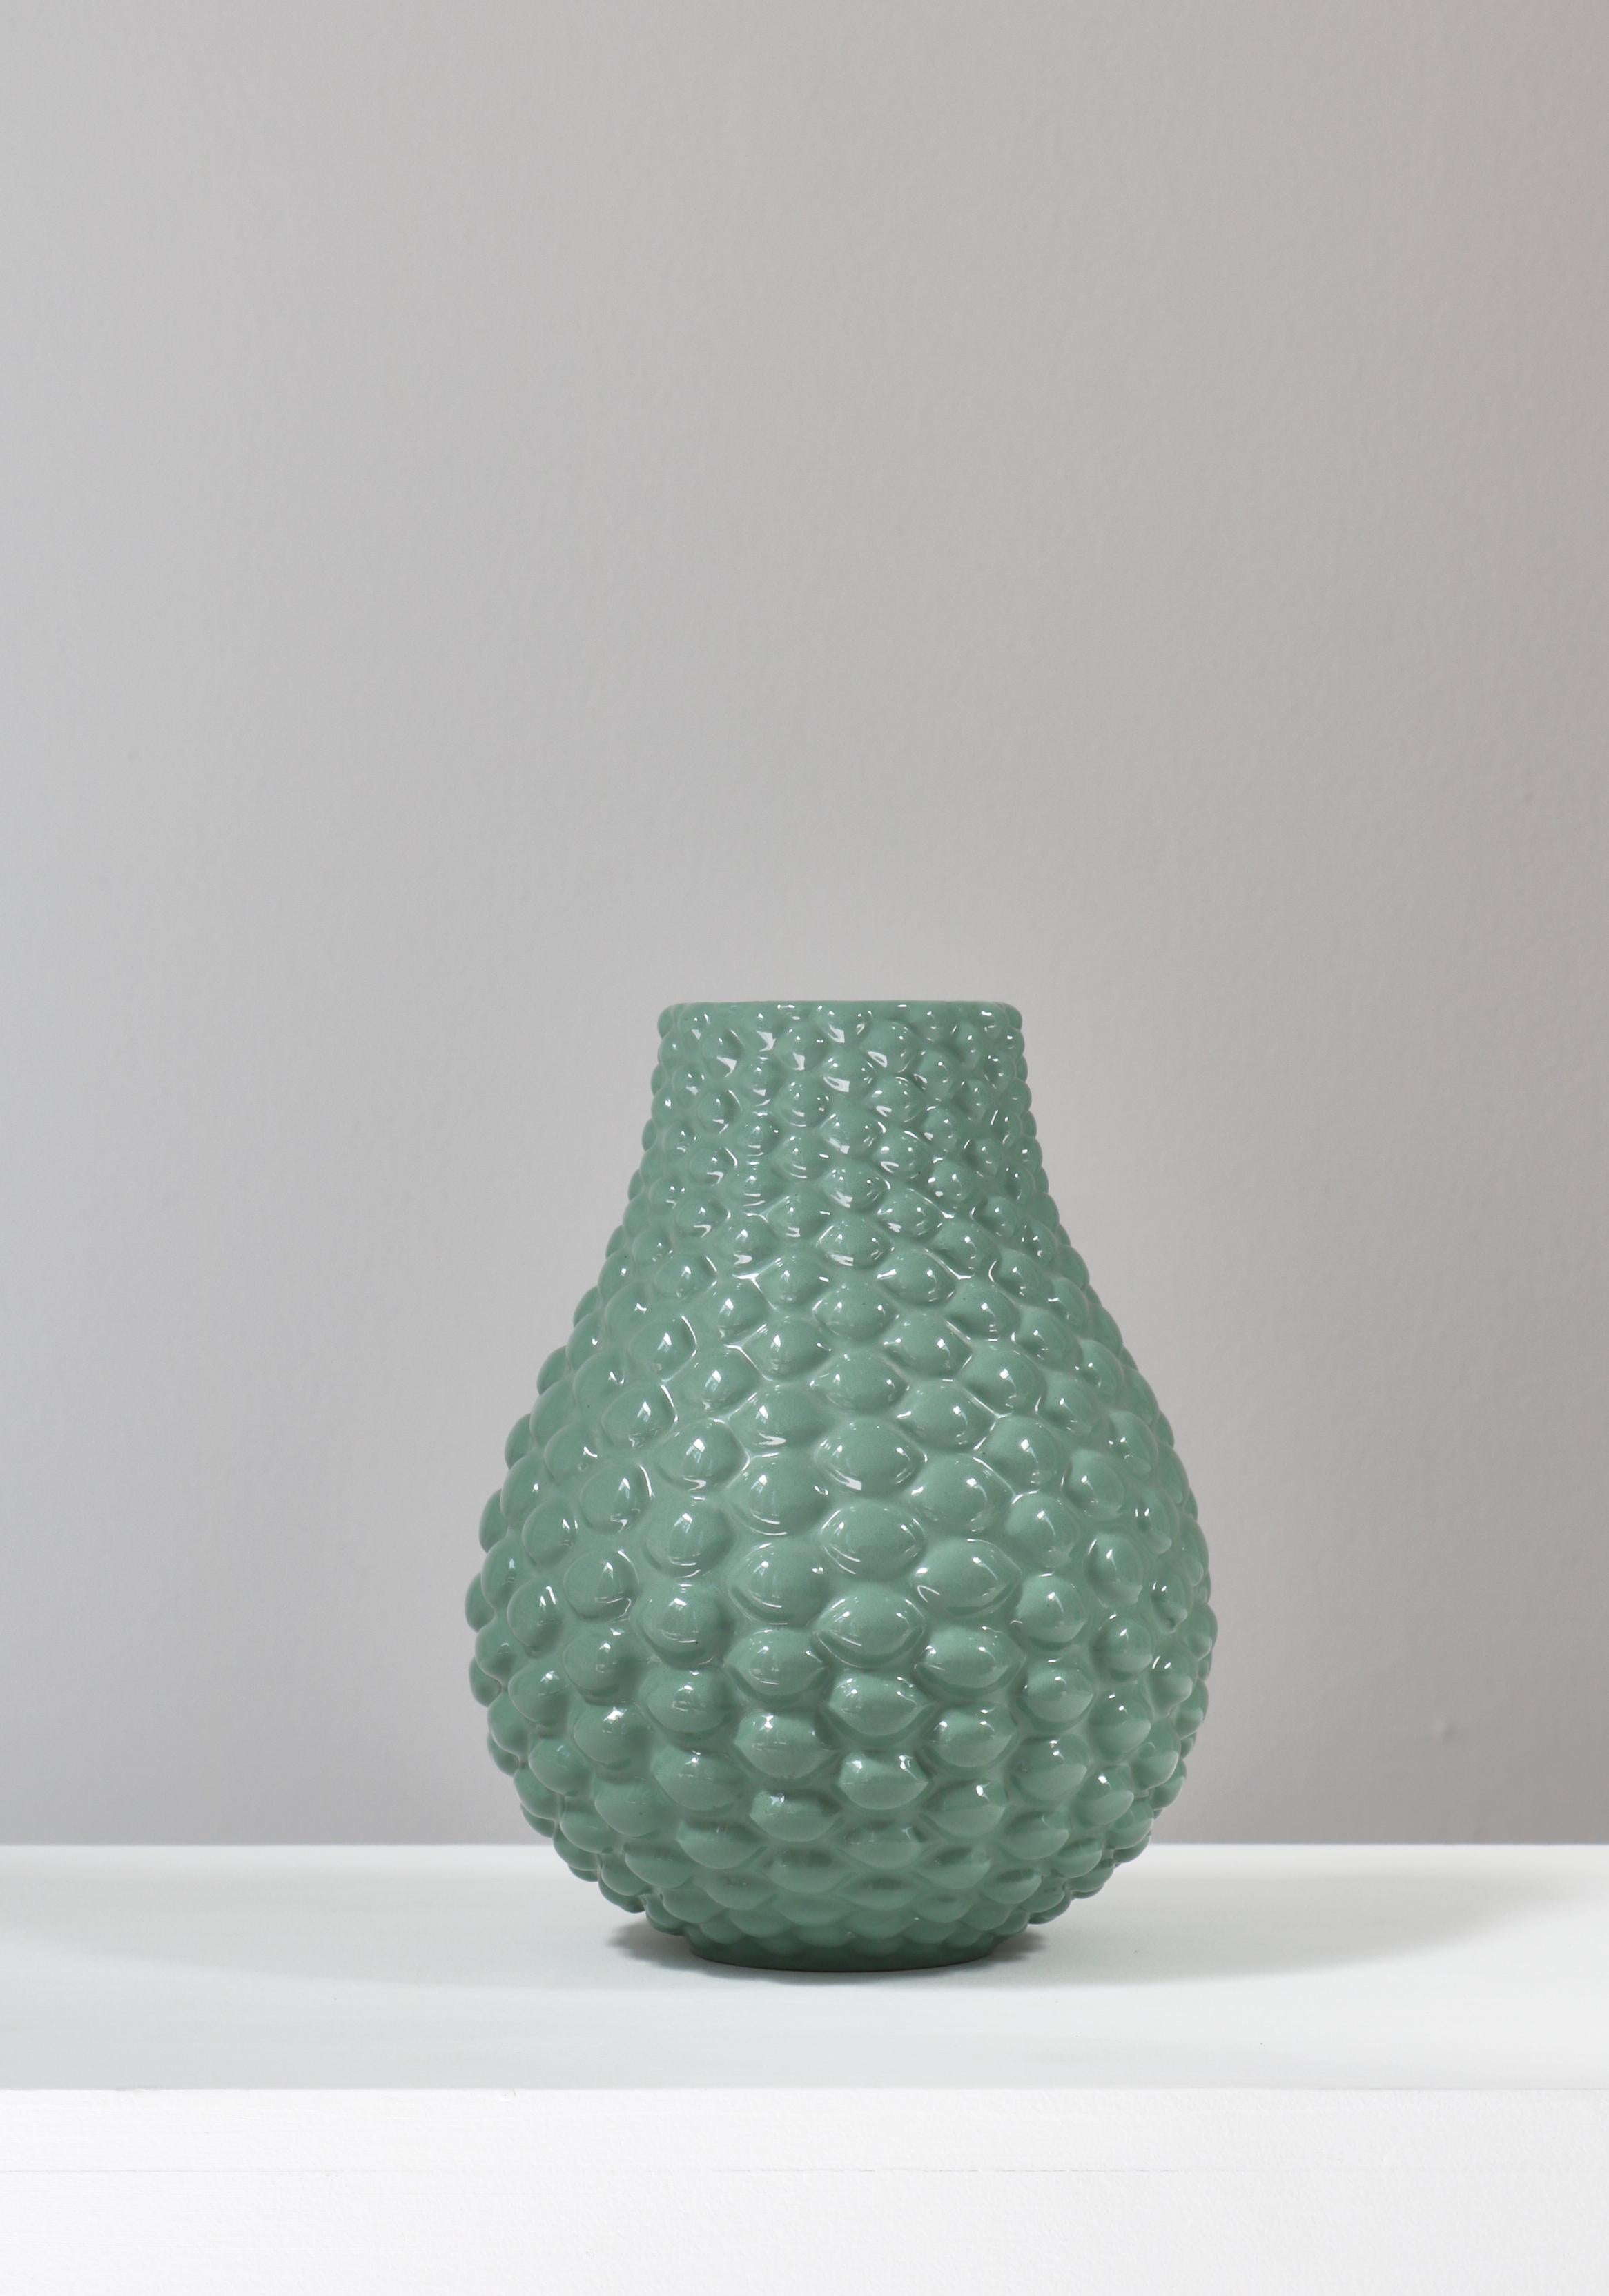 Rare and iconic budded vase by Danish master of stoneware Axel Salto in terra-cotta and celadon green glaze. Made at the terracotta manufacturer 